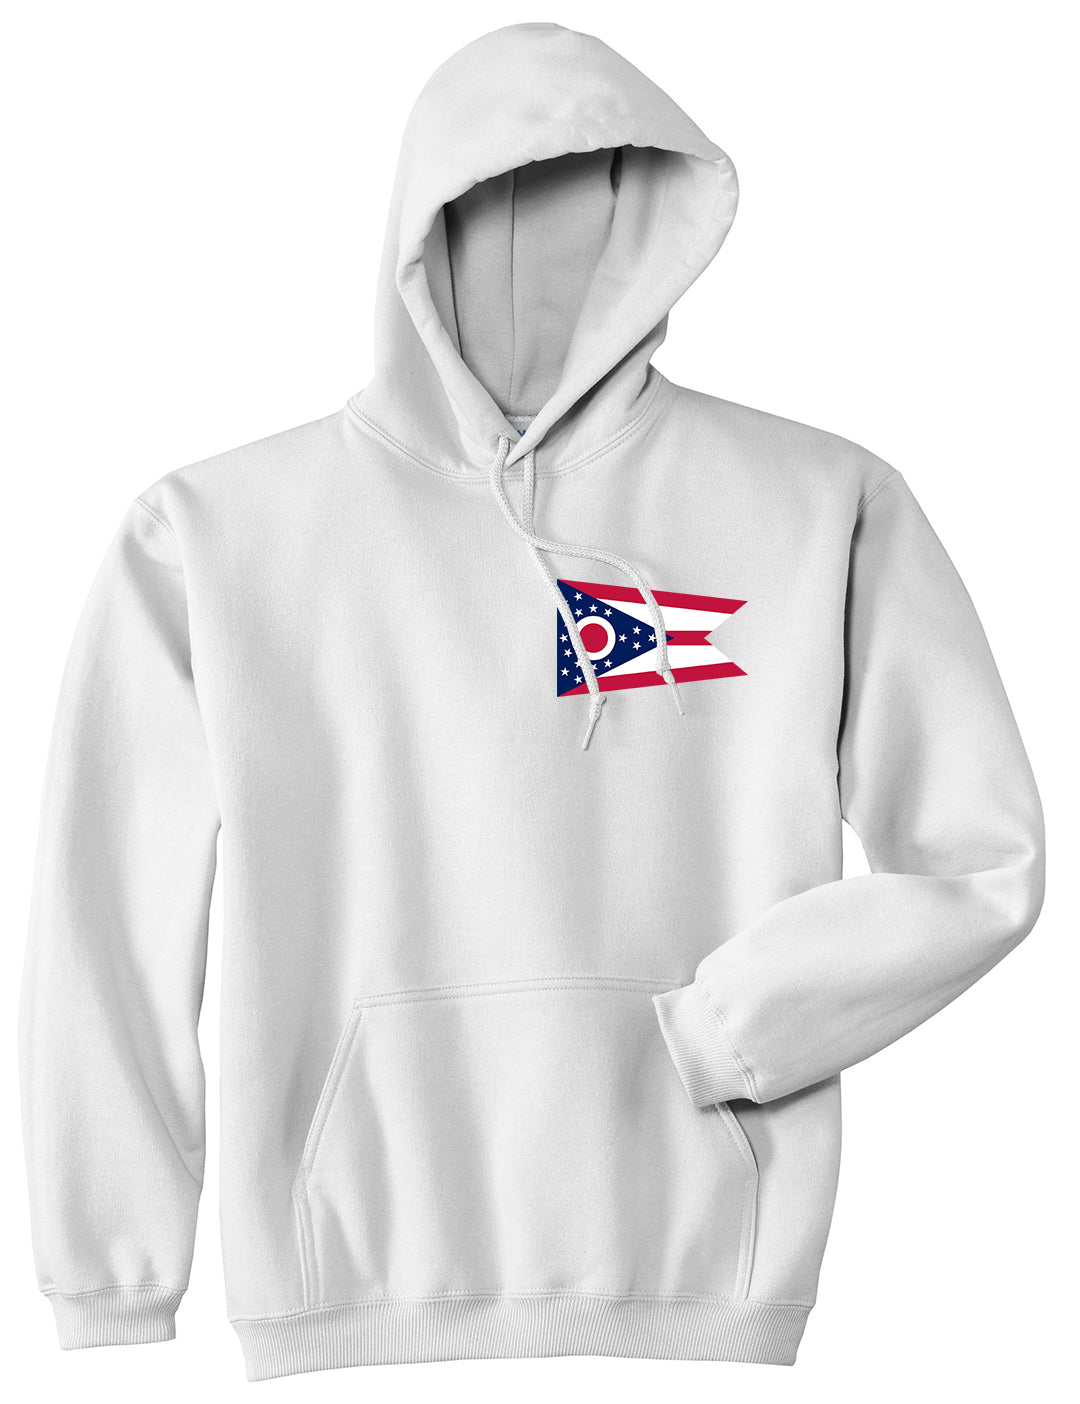 Ohio State Flag OH Chest Mens Pullover Hoodie White